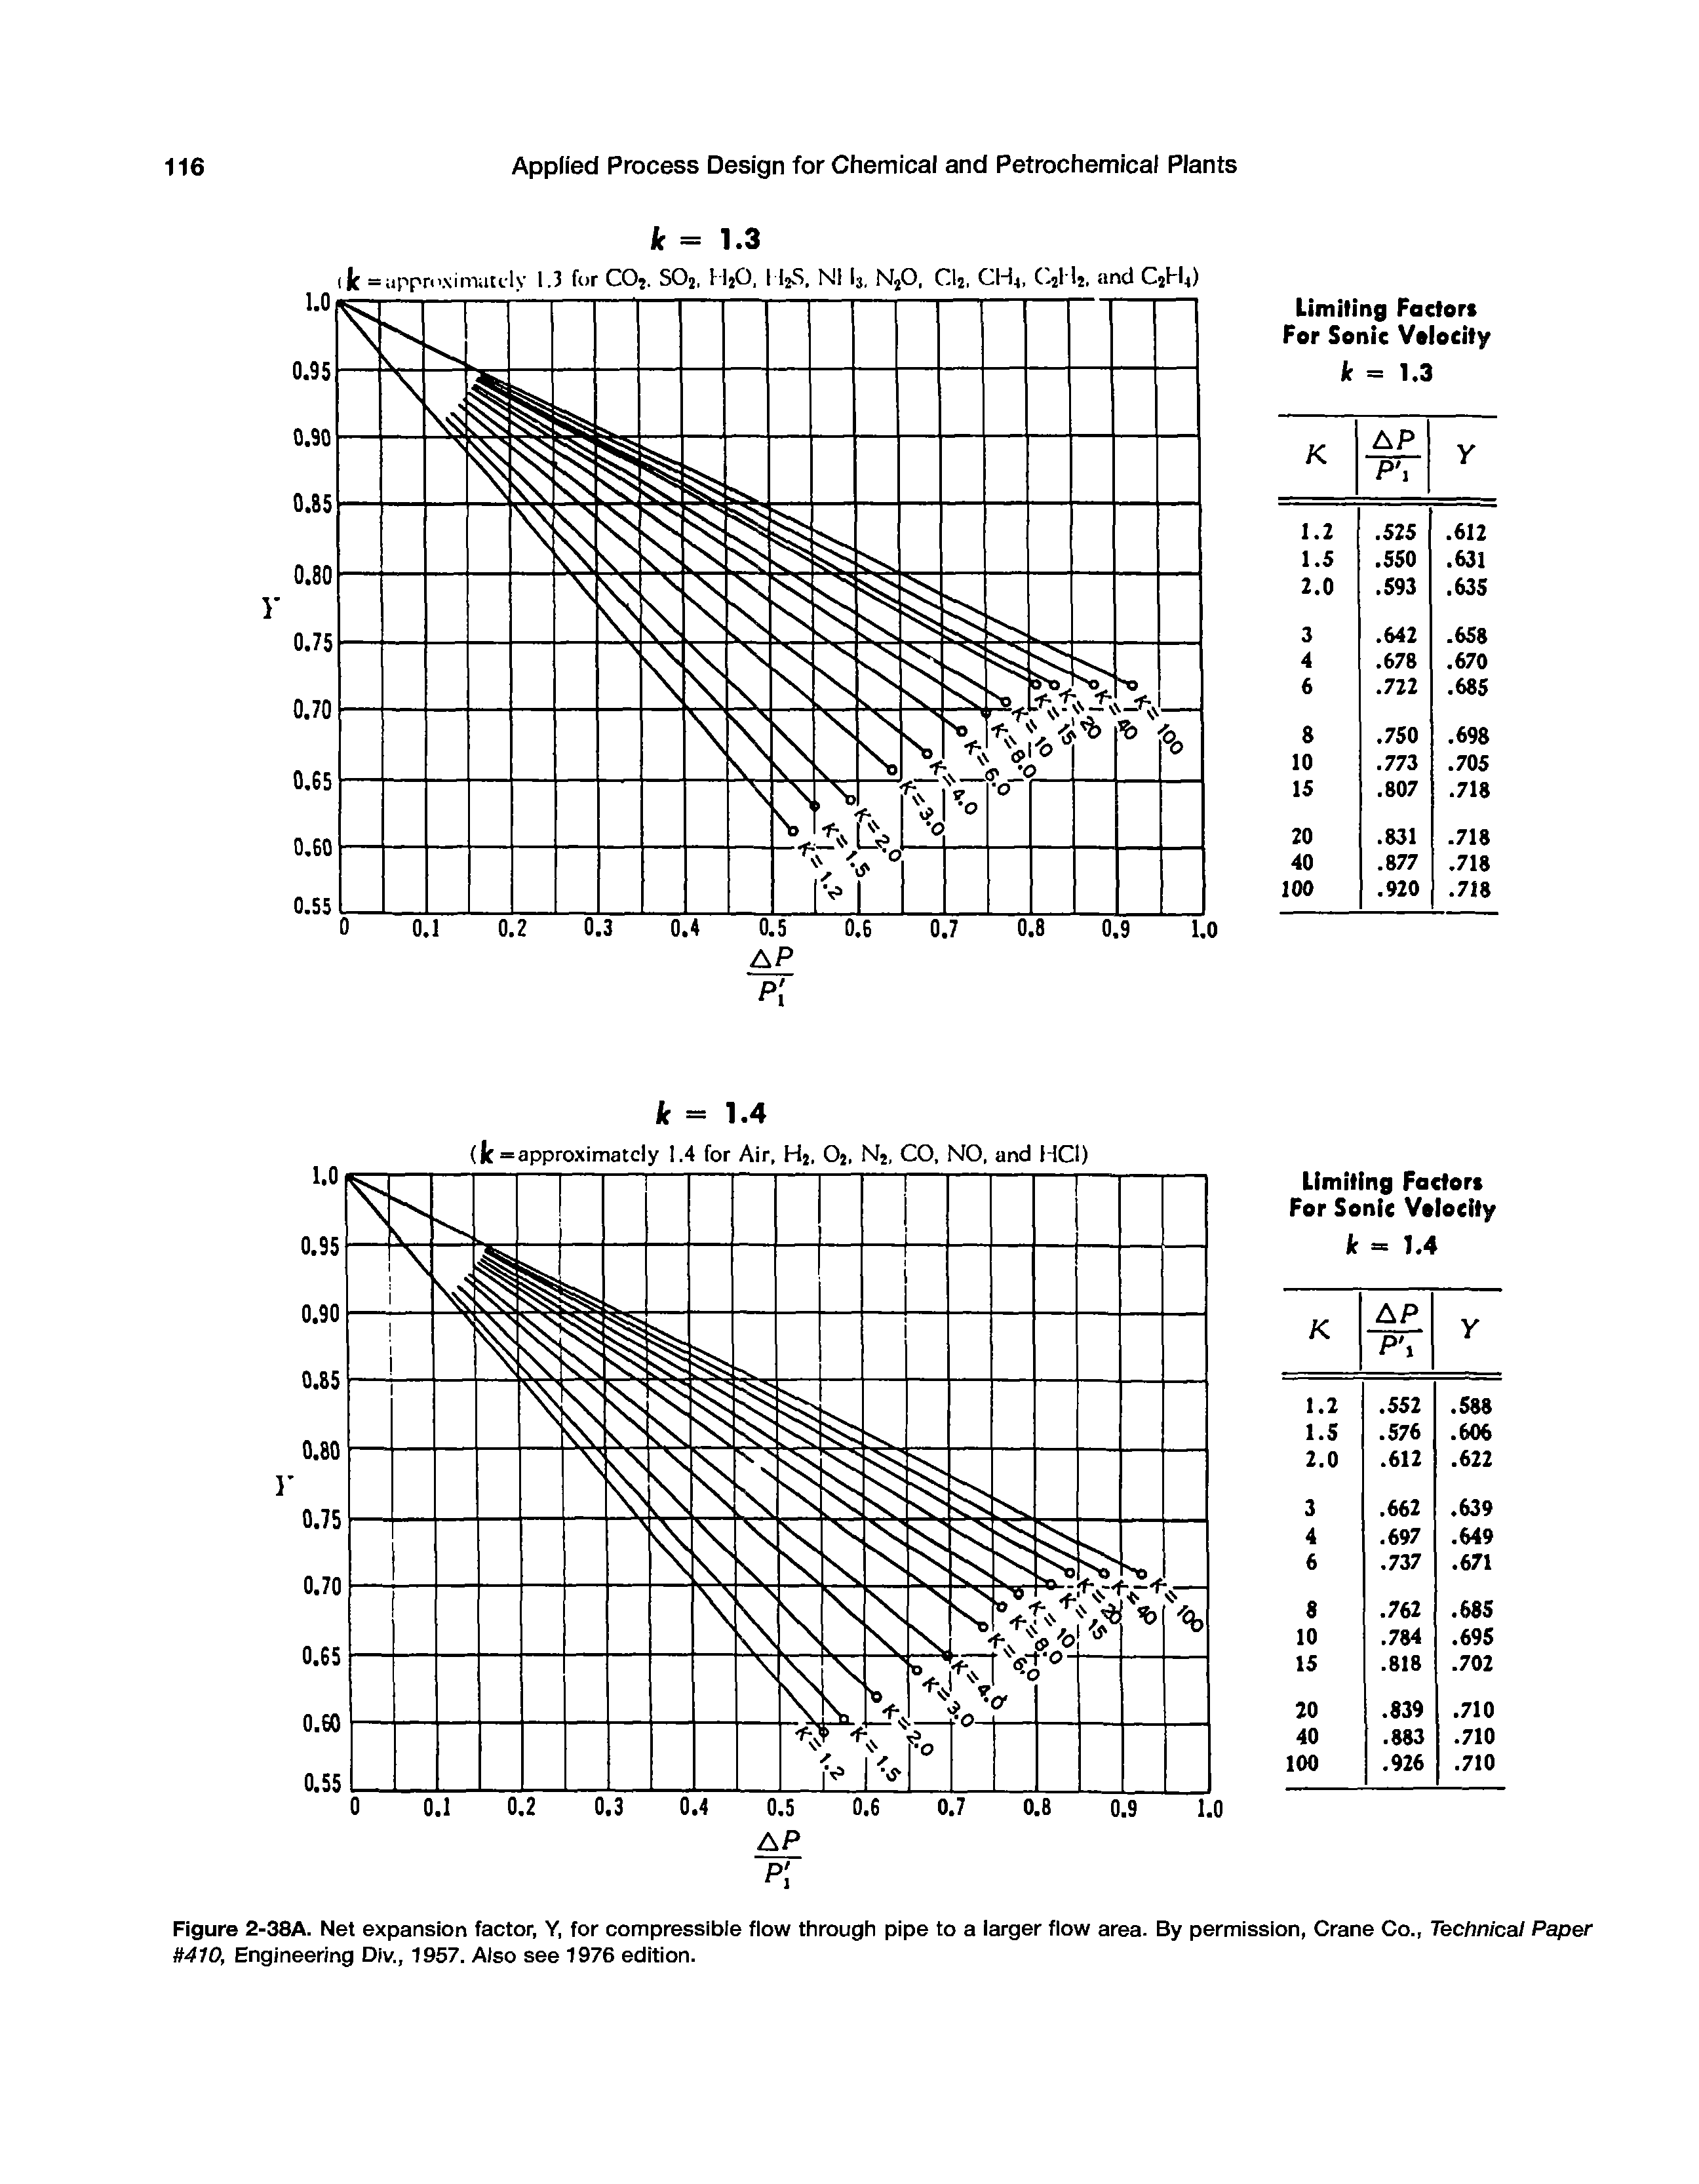 Figure 2-38A. Net expansion factor, Y, for compressible flow through pipe to a larger flow area. By permission, Crane Co., Technical Paper U410, Engineering Div., 1957. Also see 1976 edition.